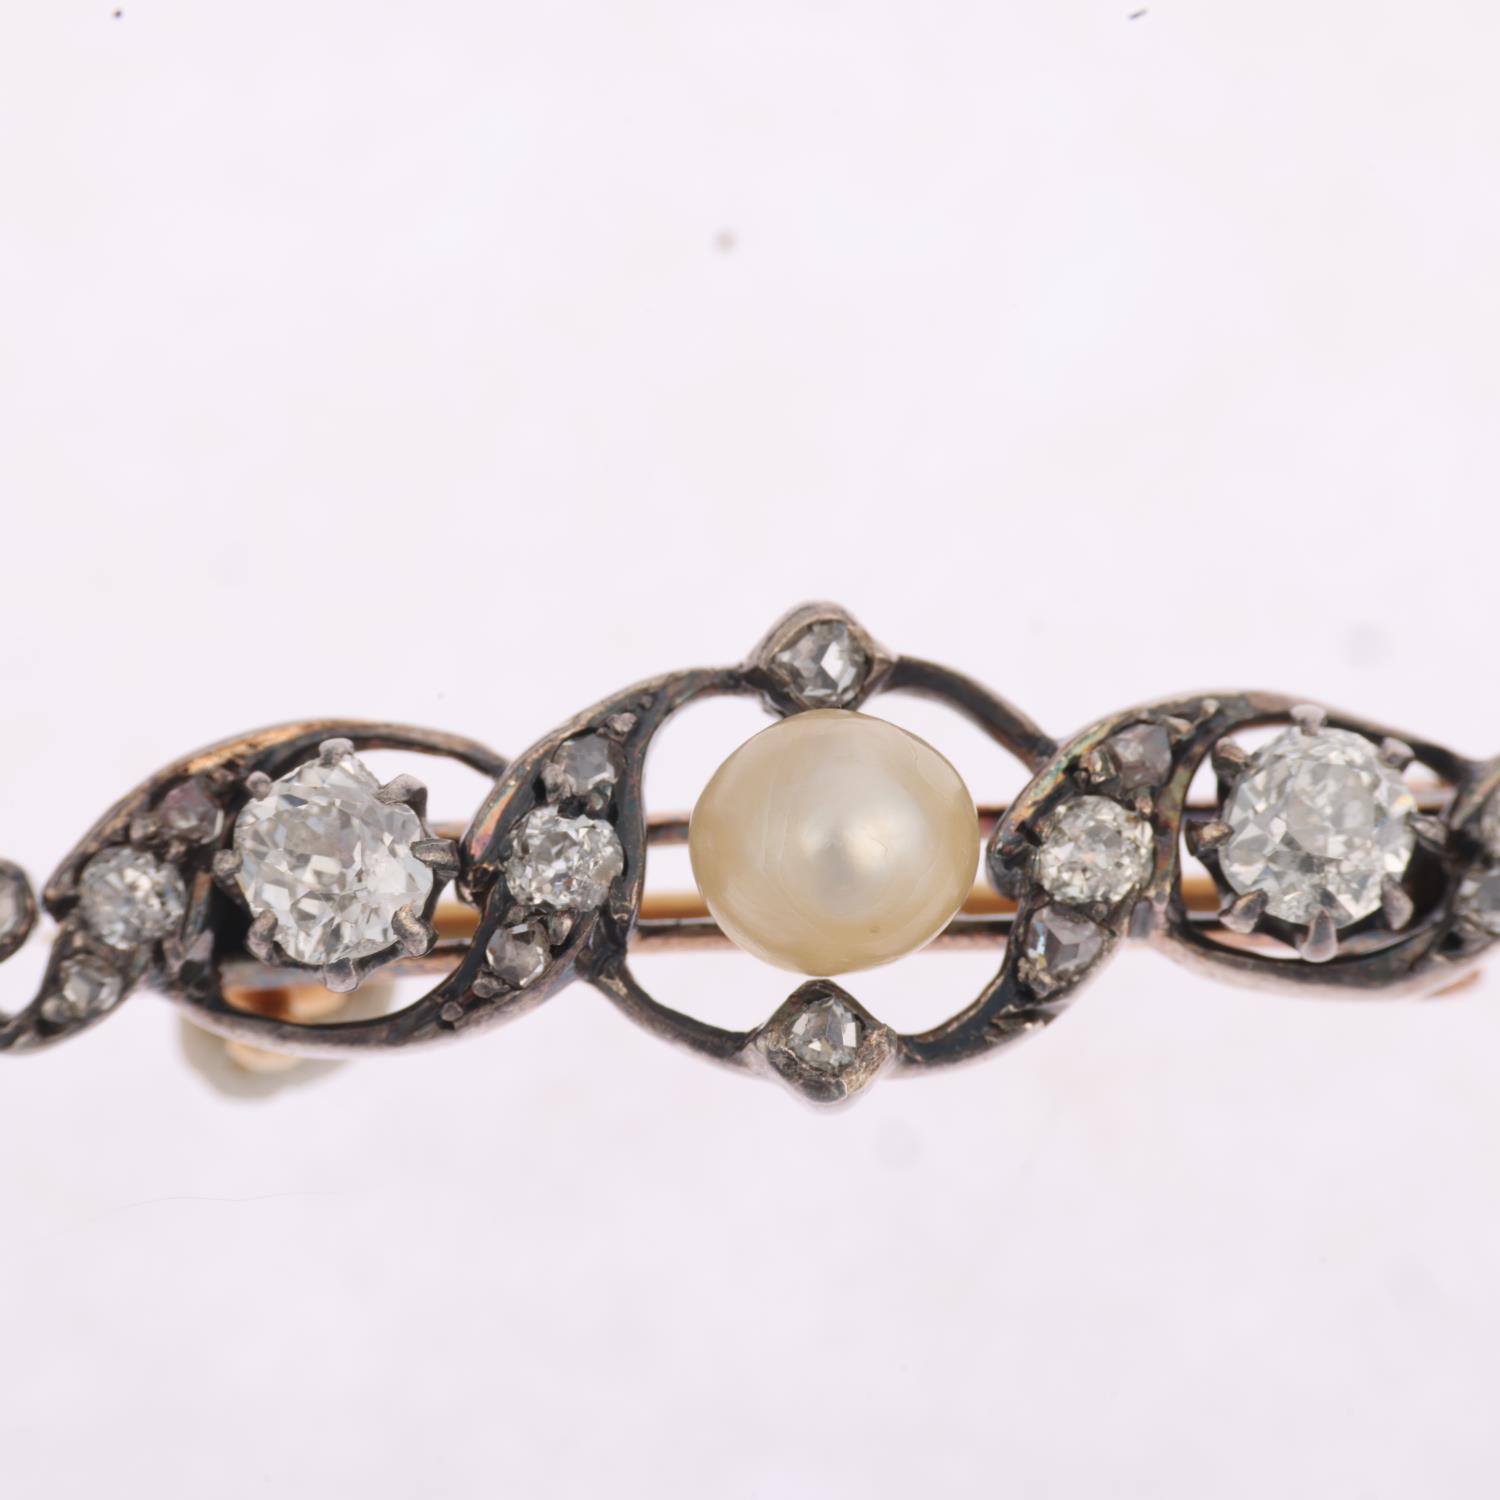 An Art Nouveau pearl and diamond openwork bar brooch, circa 1900, centrally set with 6mm pearl - Image 2 of 4